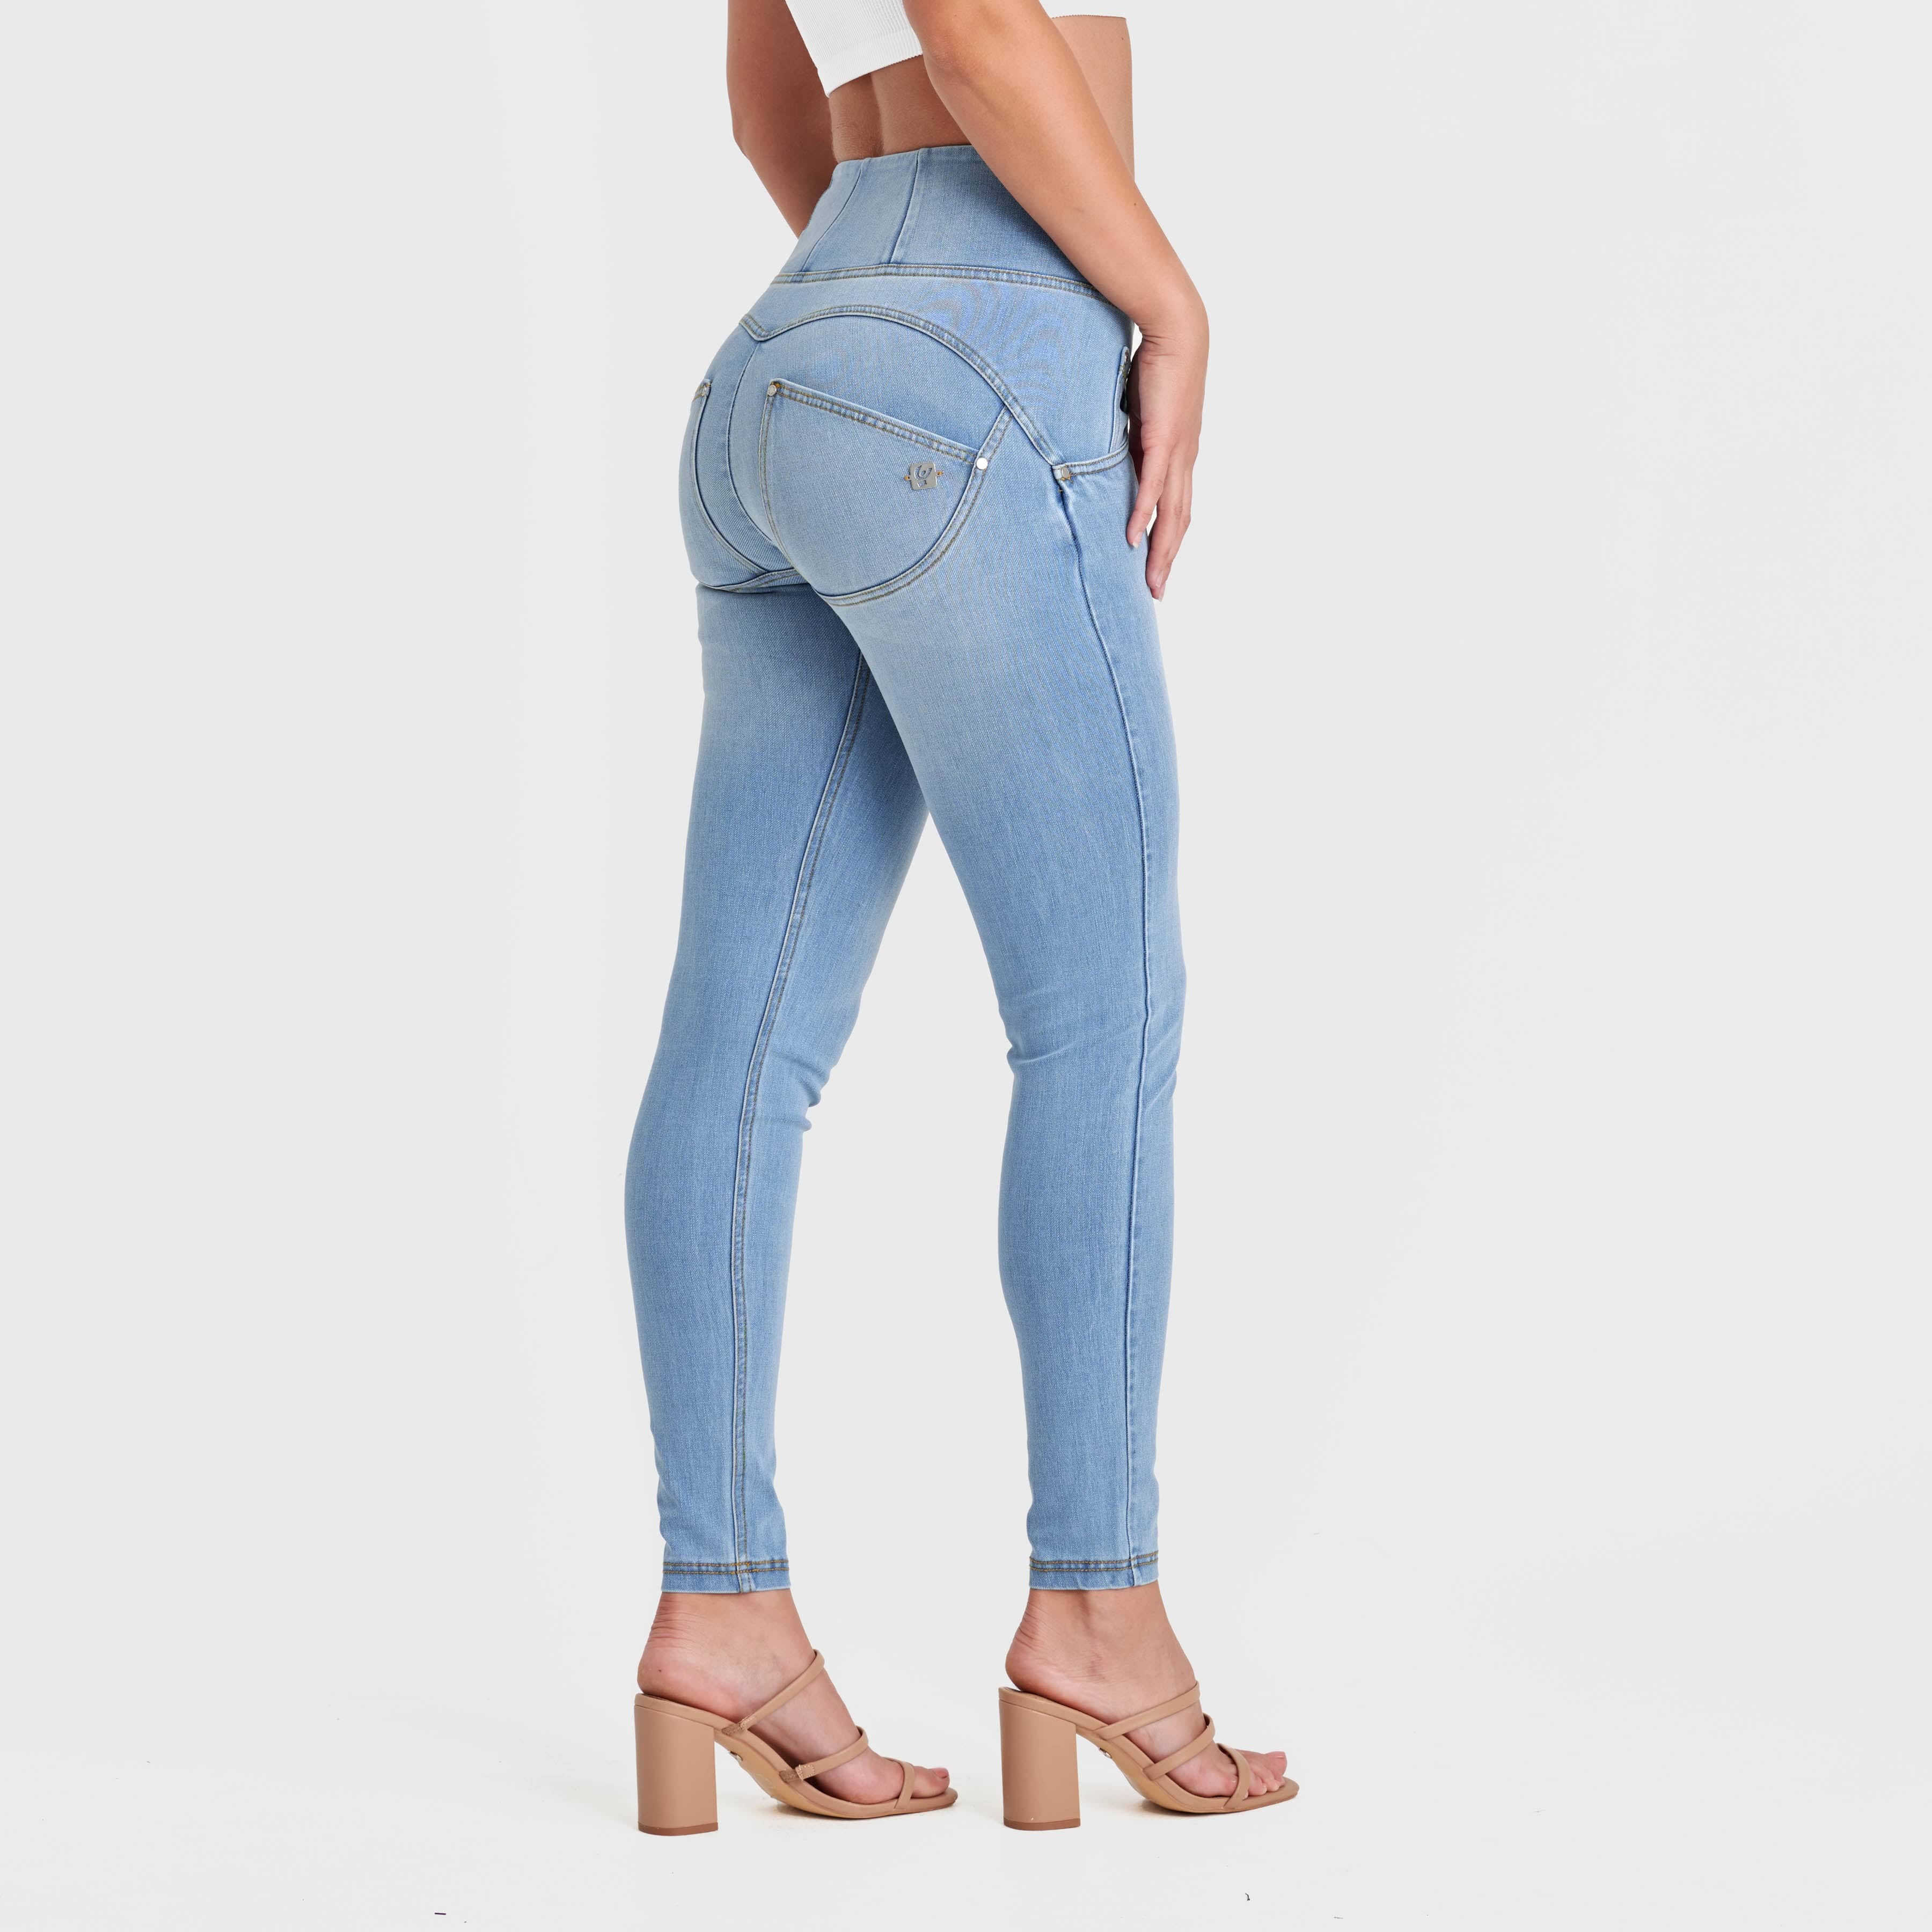 WR.UP® Snug Jeans - High Waisted - Full Length - Light Blue + Yellow Stitching 1